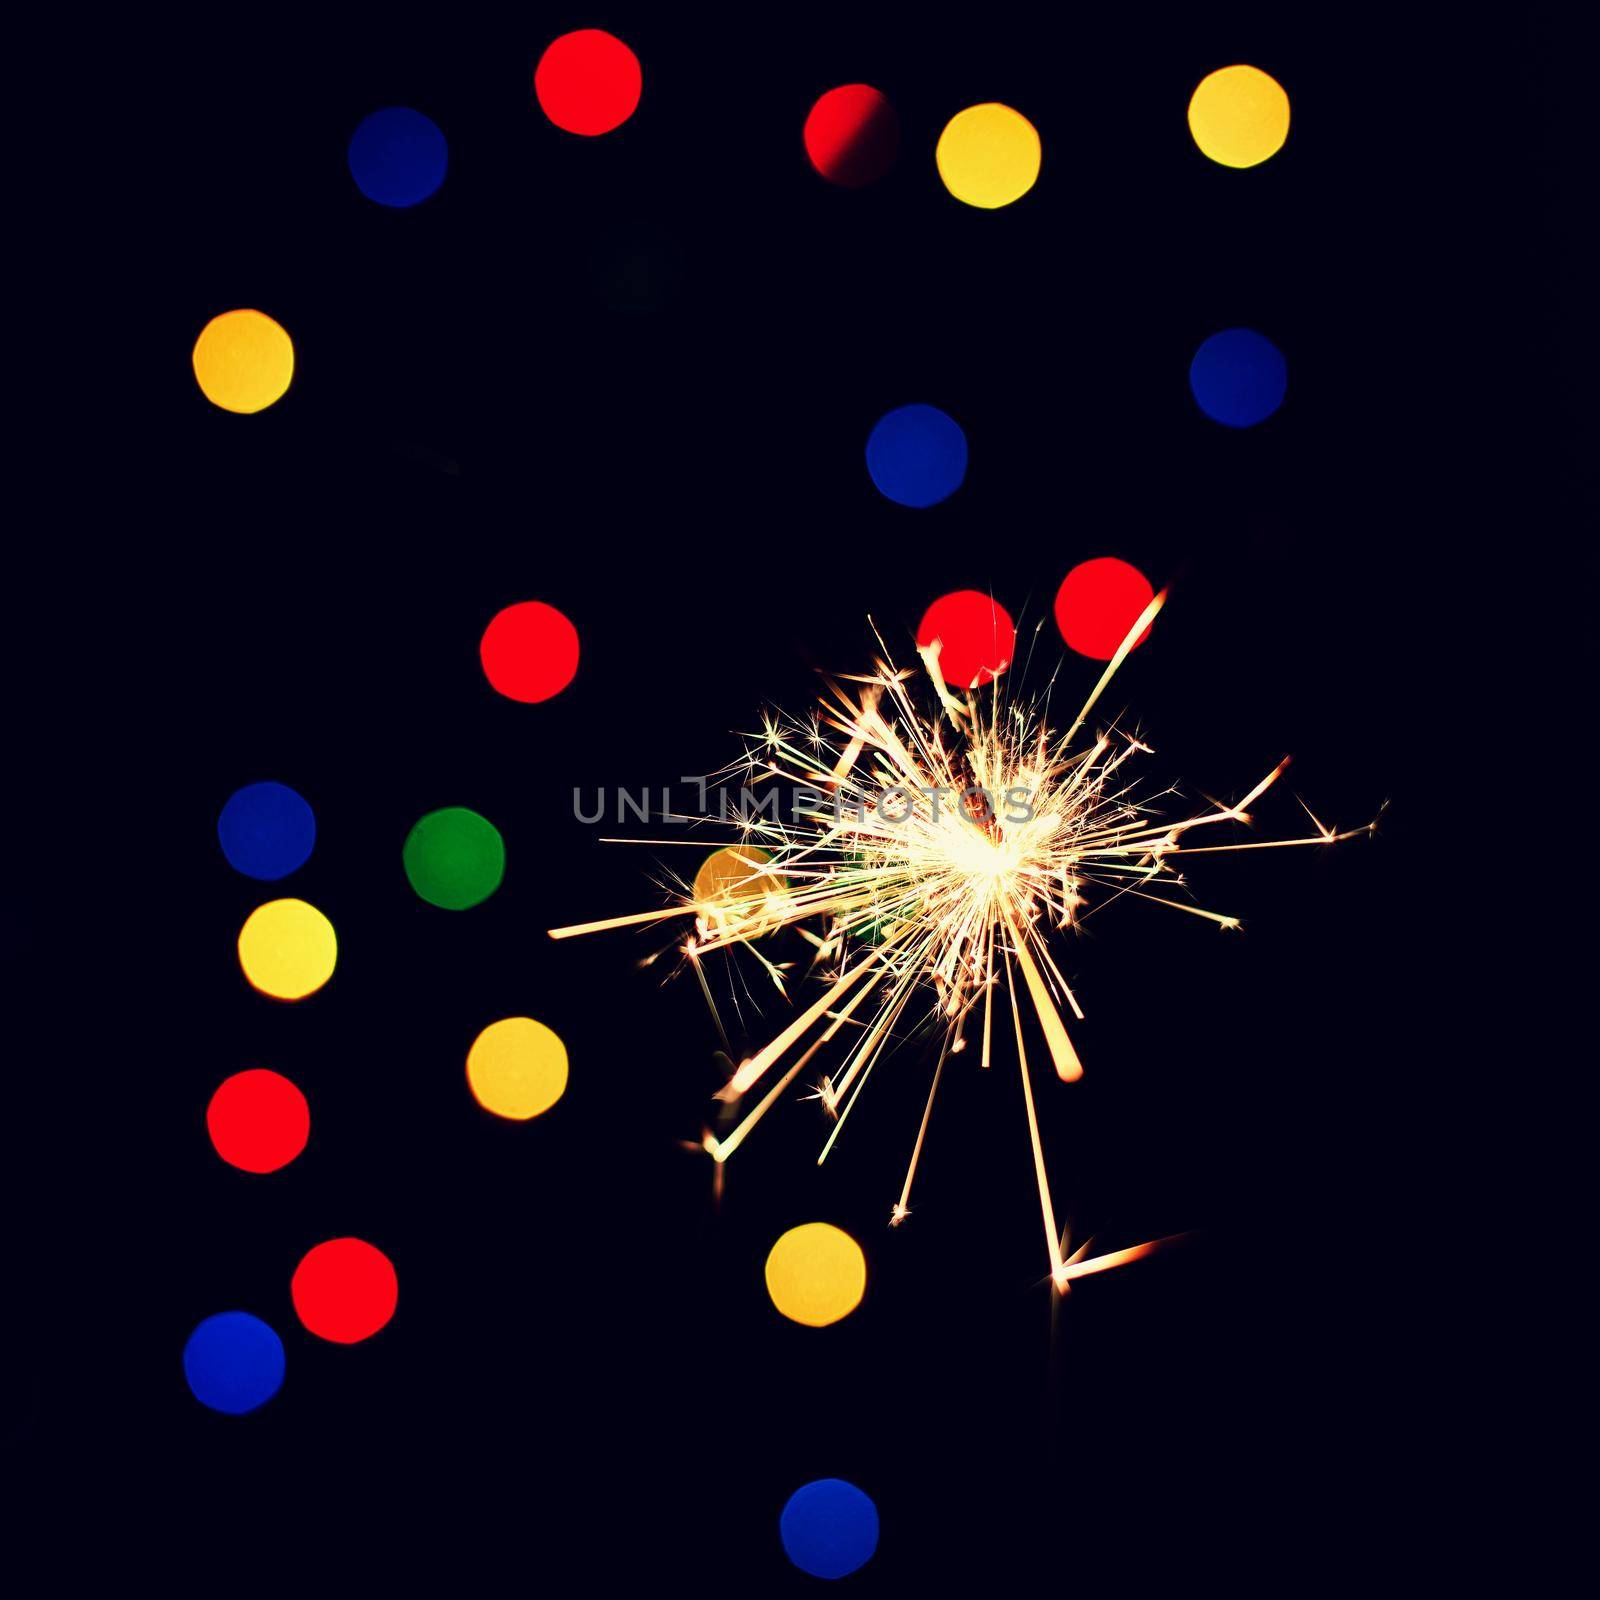 Sparkler with beautiful abstract colorful background. Concept for Christmas and Happy New Year 2021.